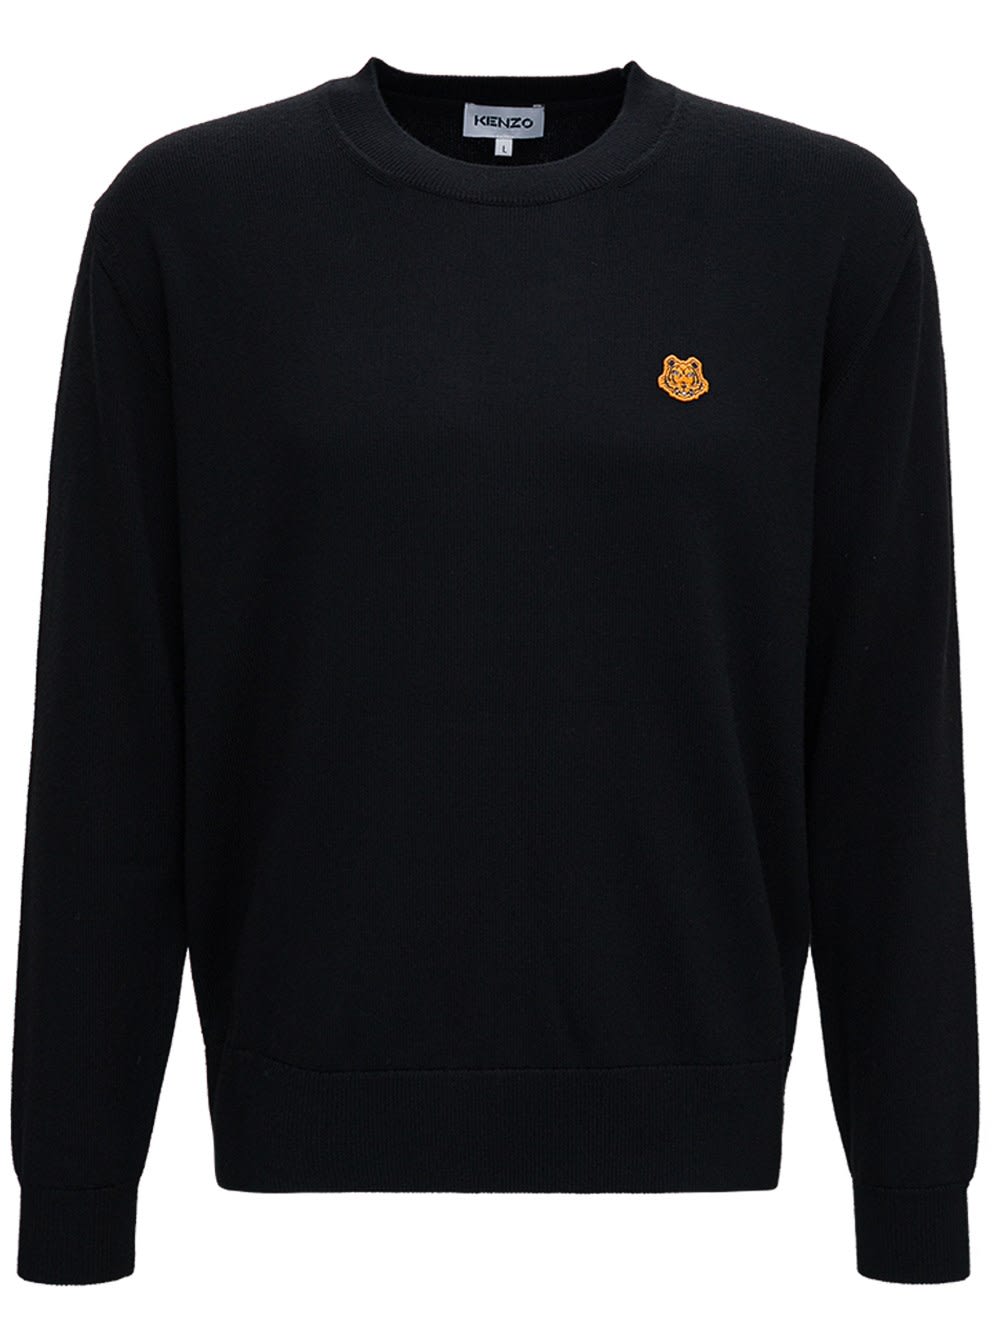 Kenzo Black Wool Sweater With Tiger Patch